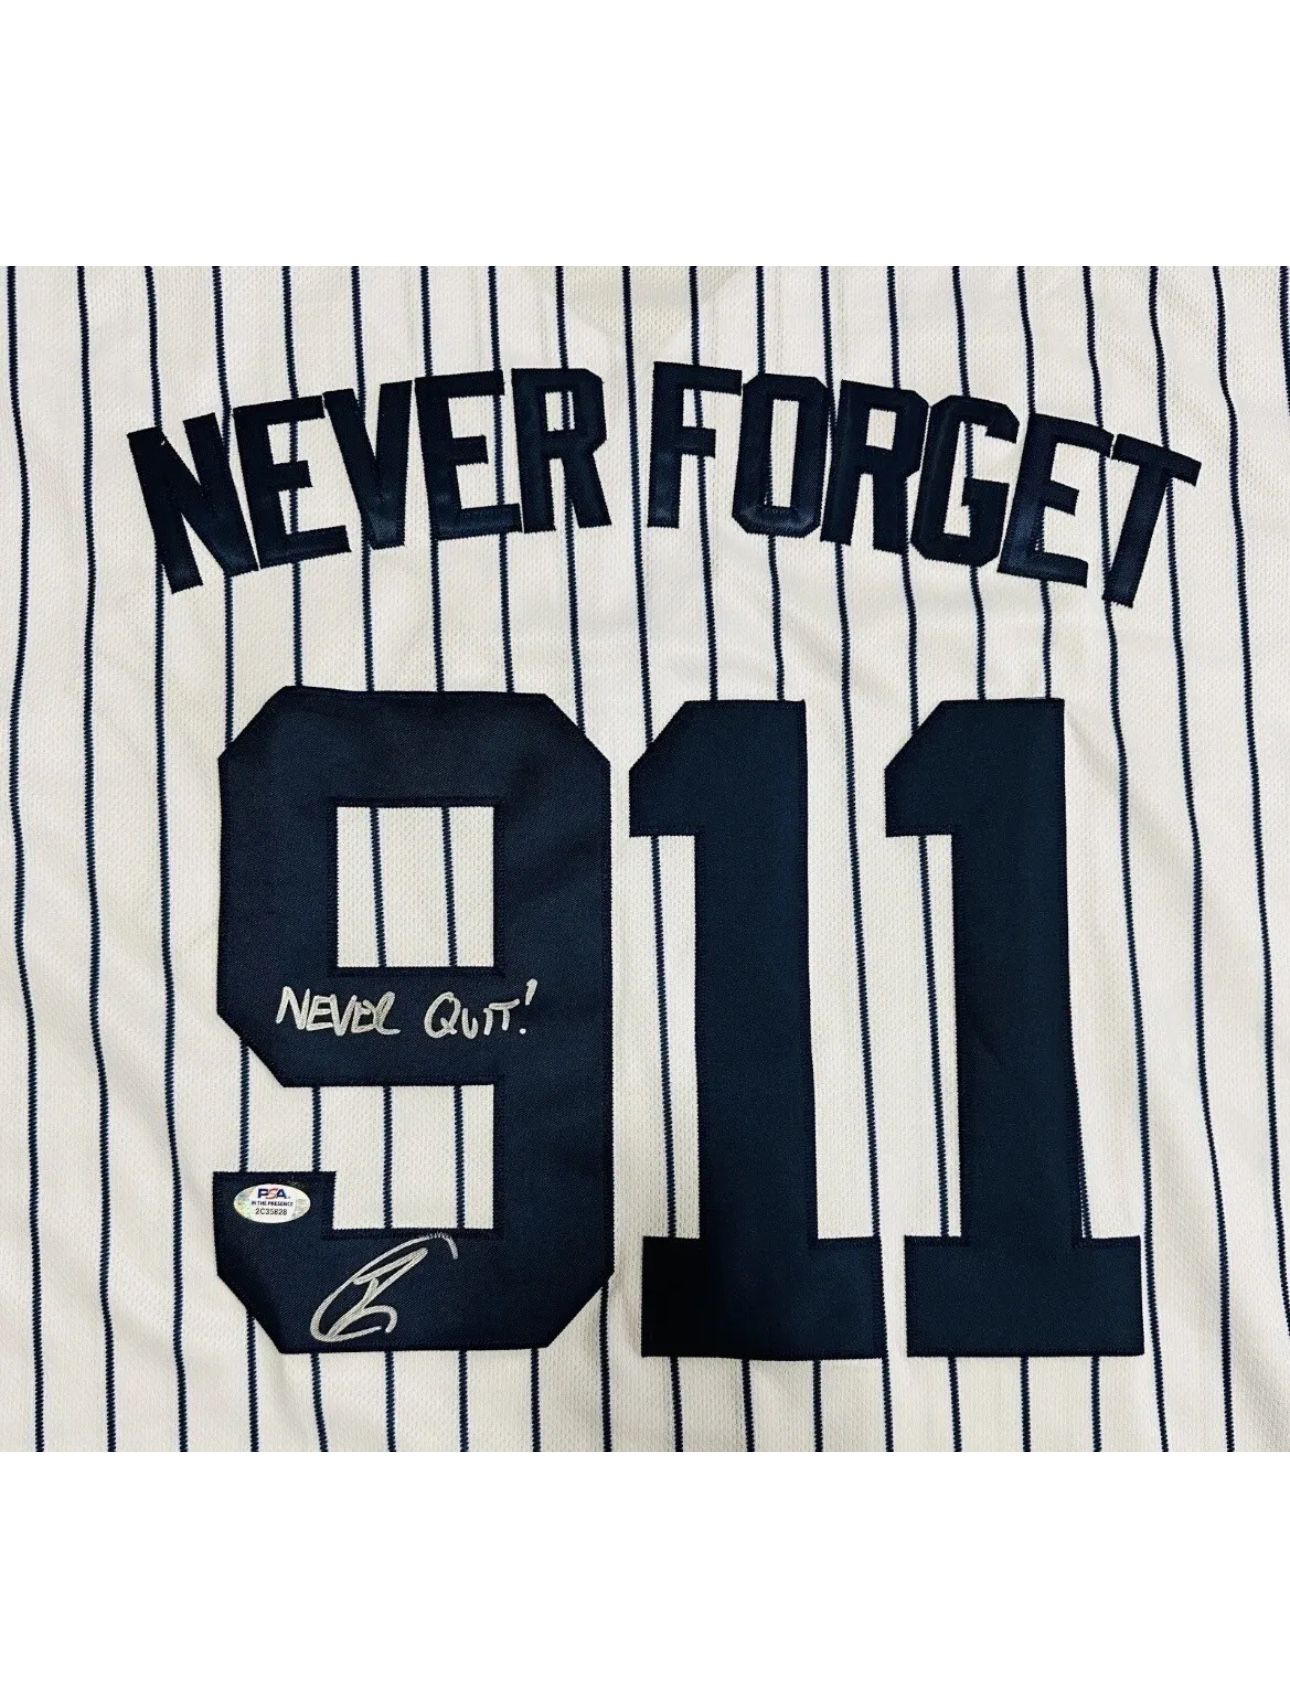 NY Yankees Customized 9/11 Never Forget Jersey Autographed By US